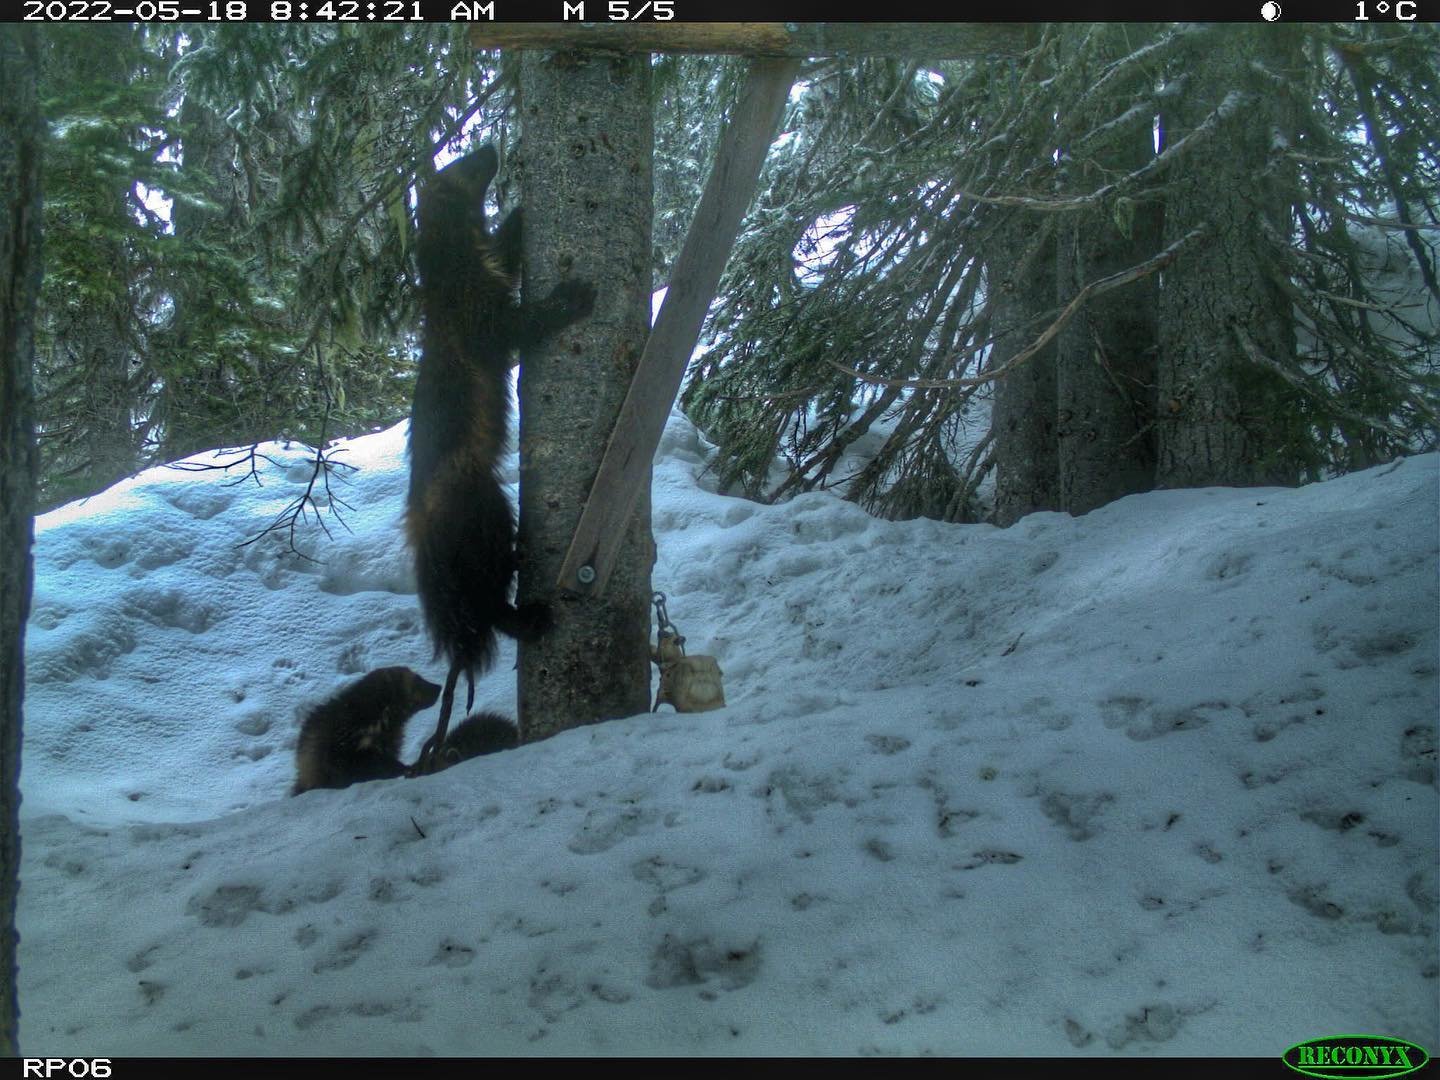 Wolverines have reproduced at Mount Rainier National Park for a third year in a row, according to an announcement last week by the Cascade Carnivore Project.